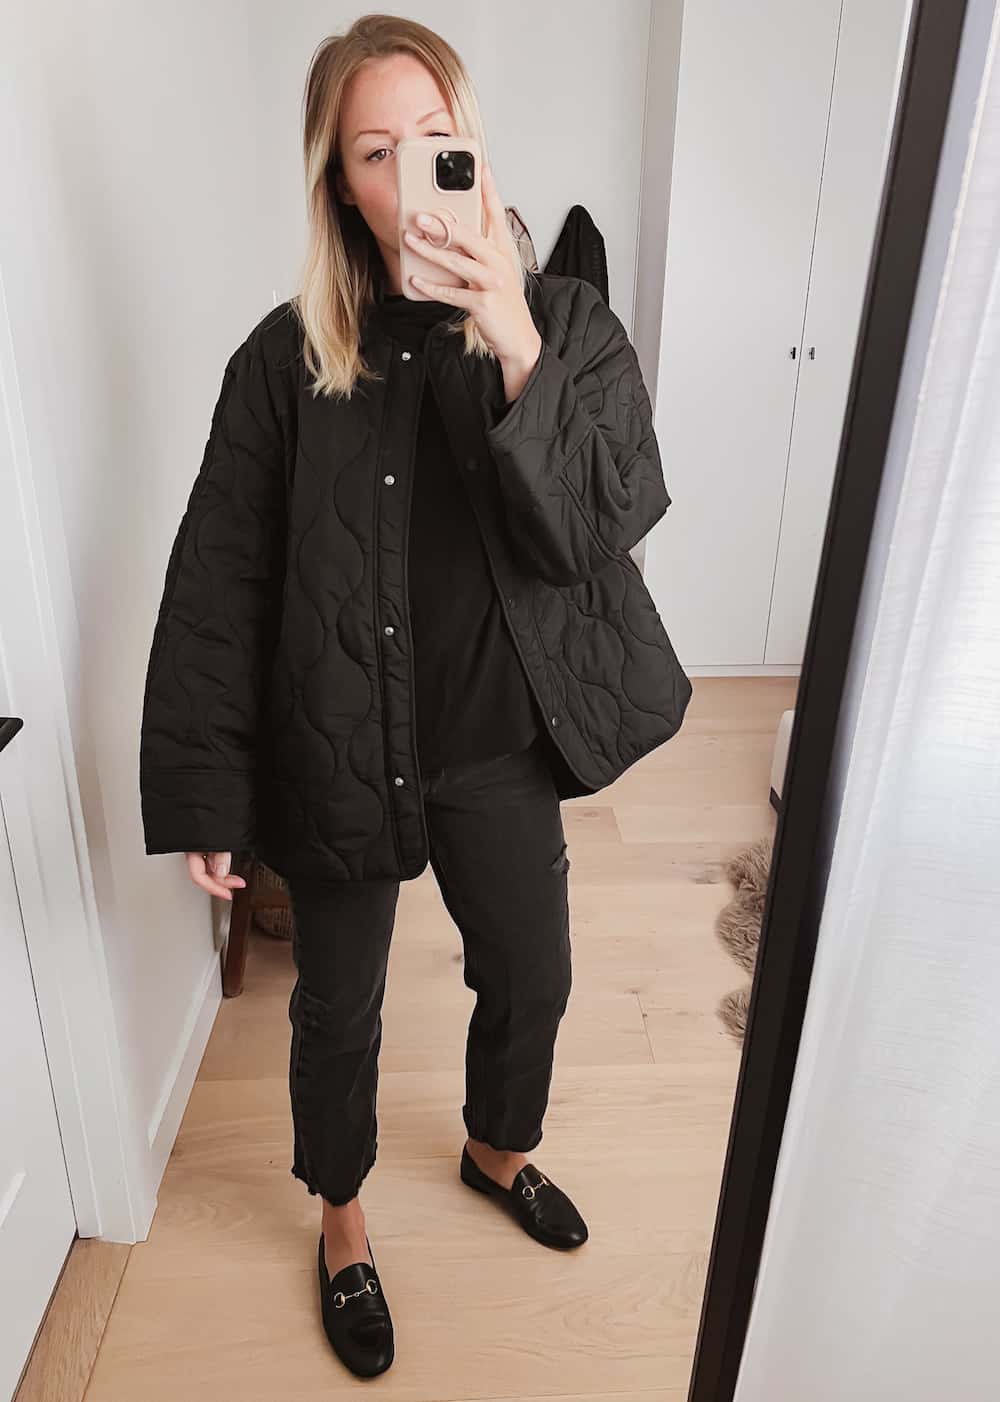 image of a woman in a black quilted jacket, black jeans, and black loafers